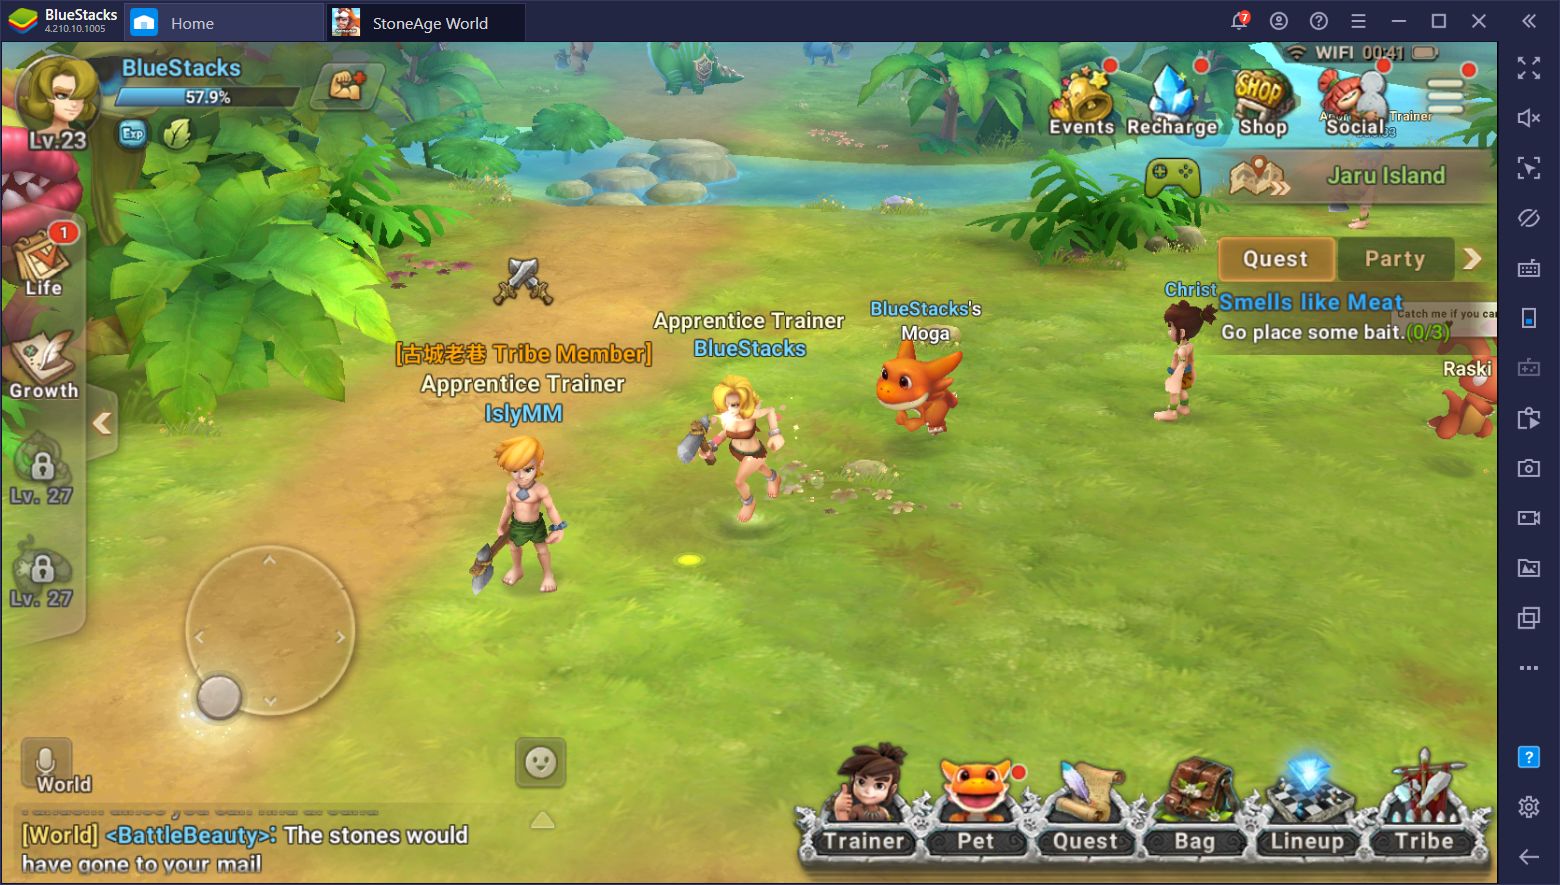 Netmarble's Latest StoneAge World just Launched: Start Playing on PC with BlueStacks